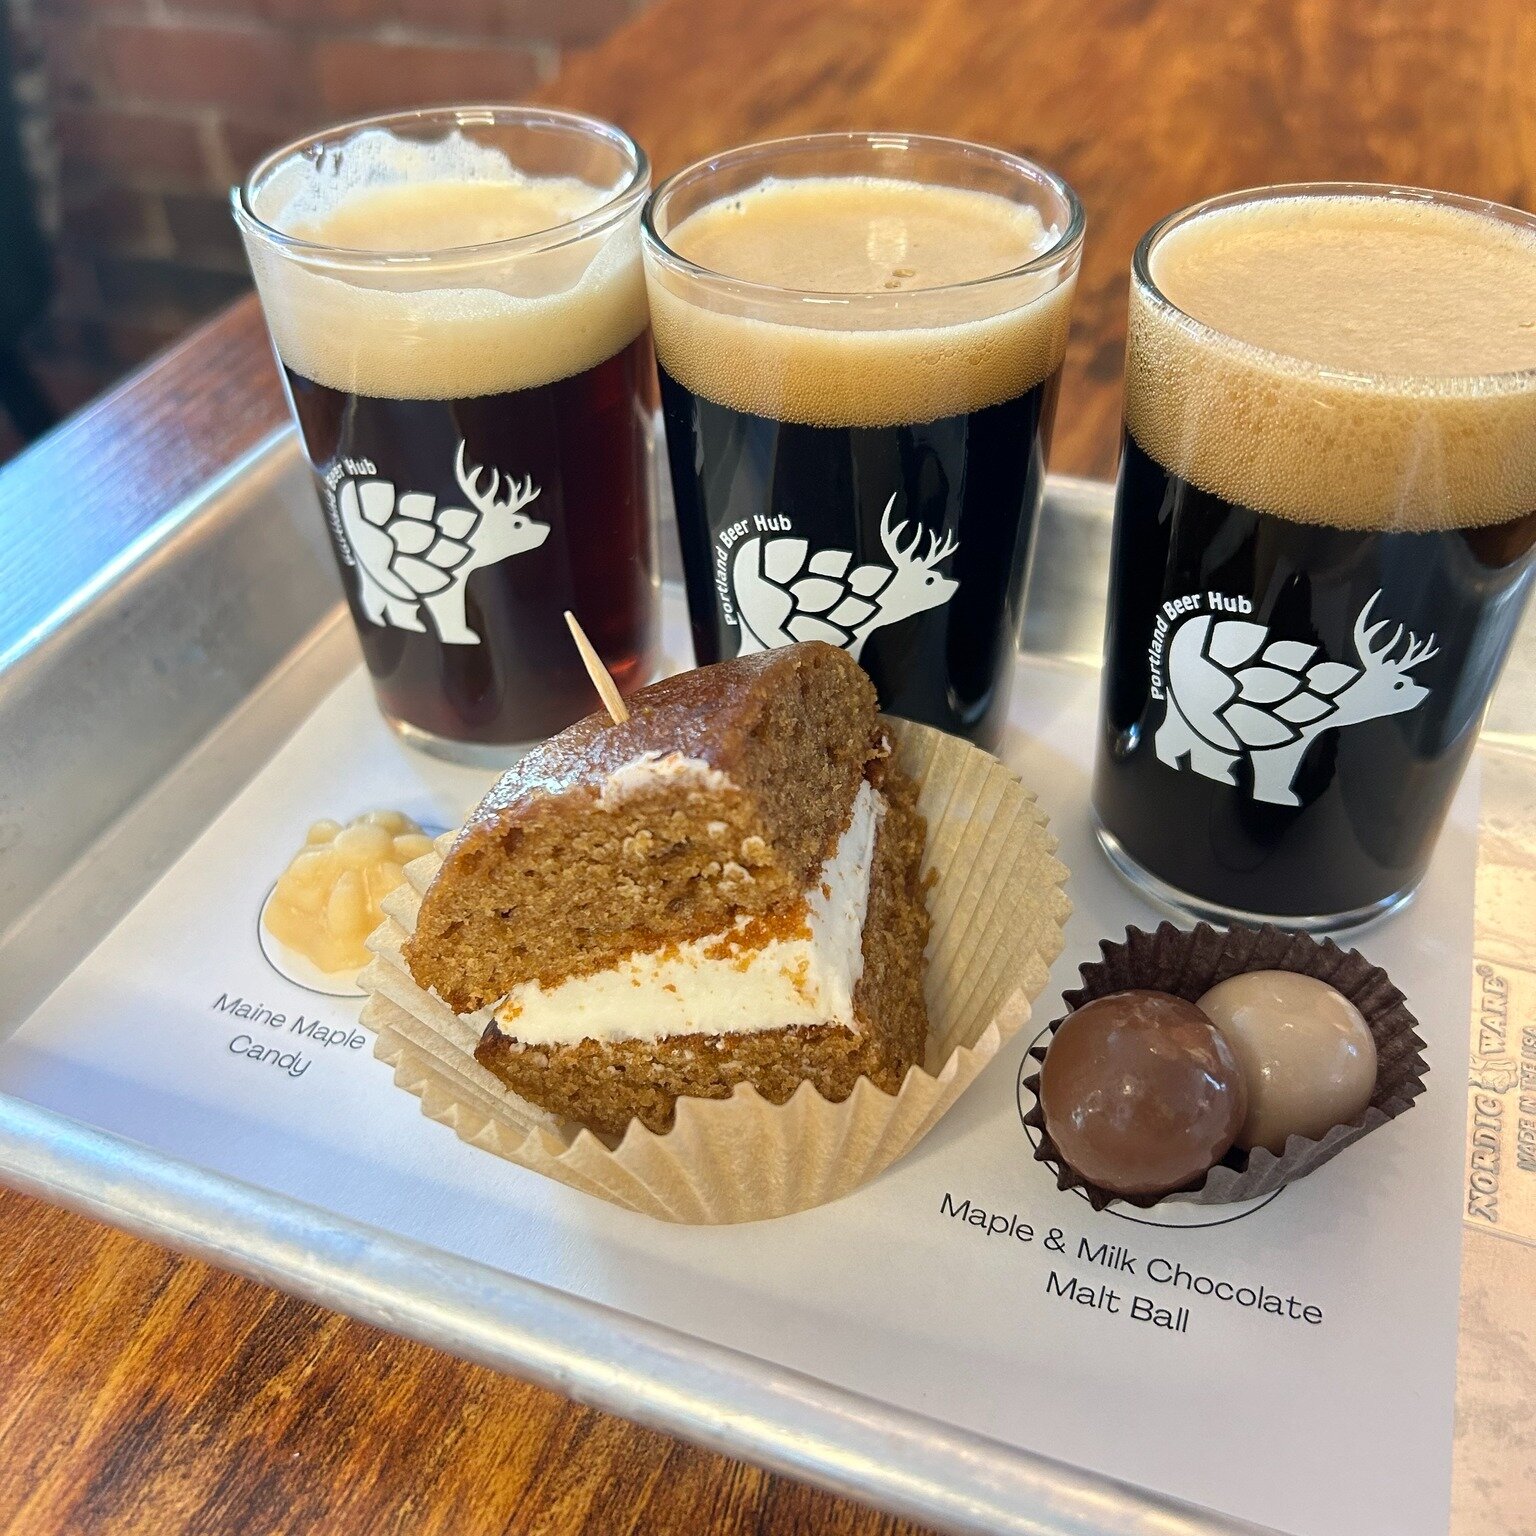 🍁 Who needs pancakes when you can get your maple fix and a beer?! 

Maine Maple Weekend Beer Pairing featuring 👇

🍺 Maine Maple Candy + Sap Haus Smoked Lager from @oxbowbrewingcompany 

🍺 Maple Whoopie Pie + Whoopie Pie Stout from @somebrewingco 